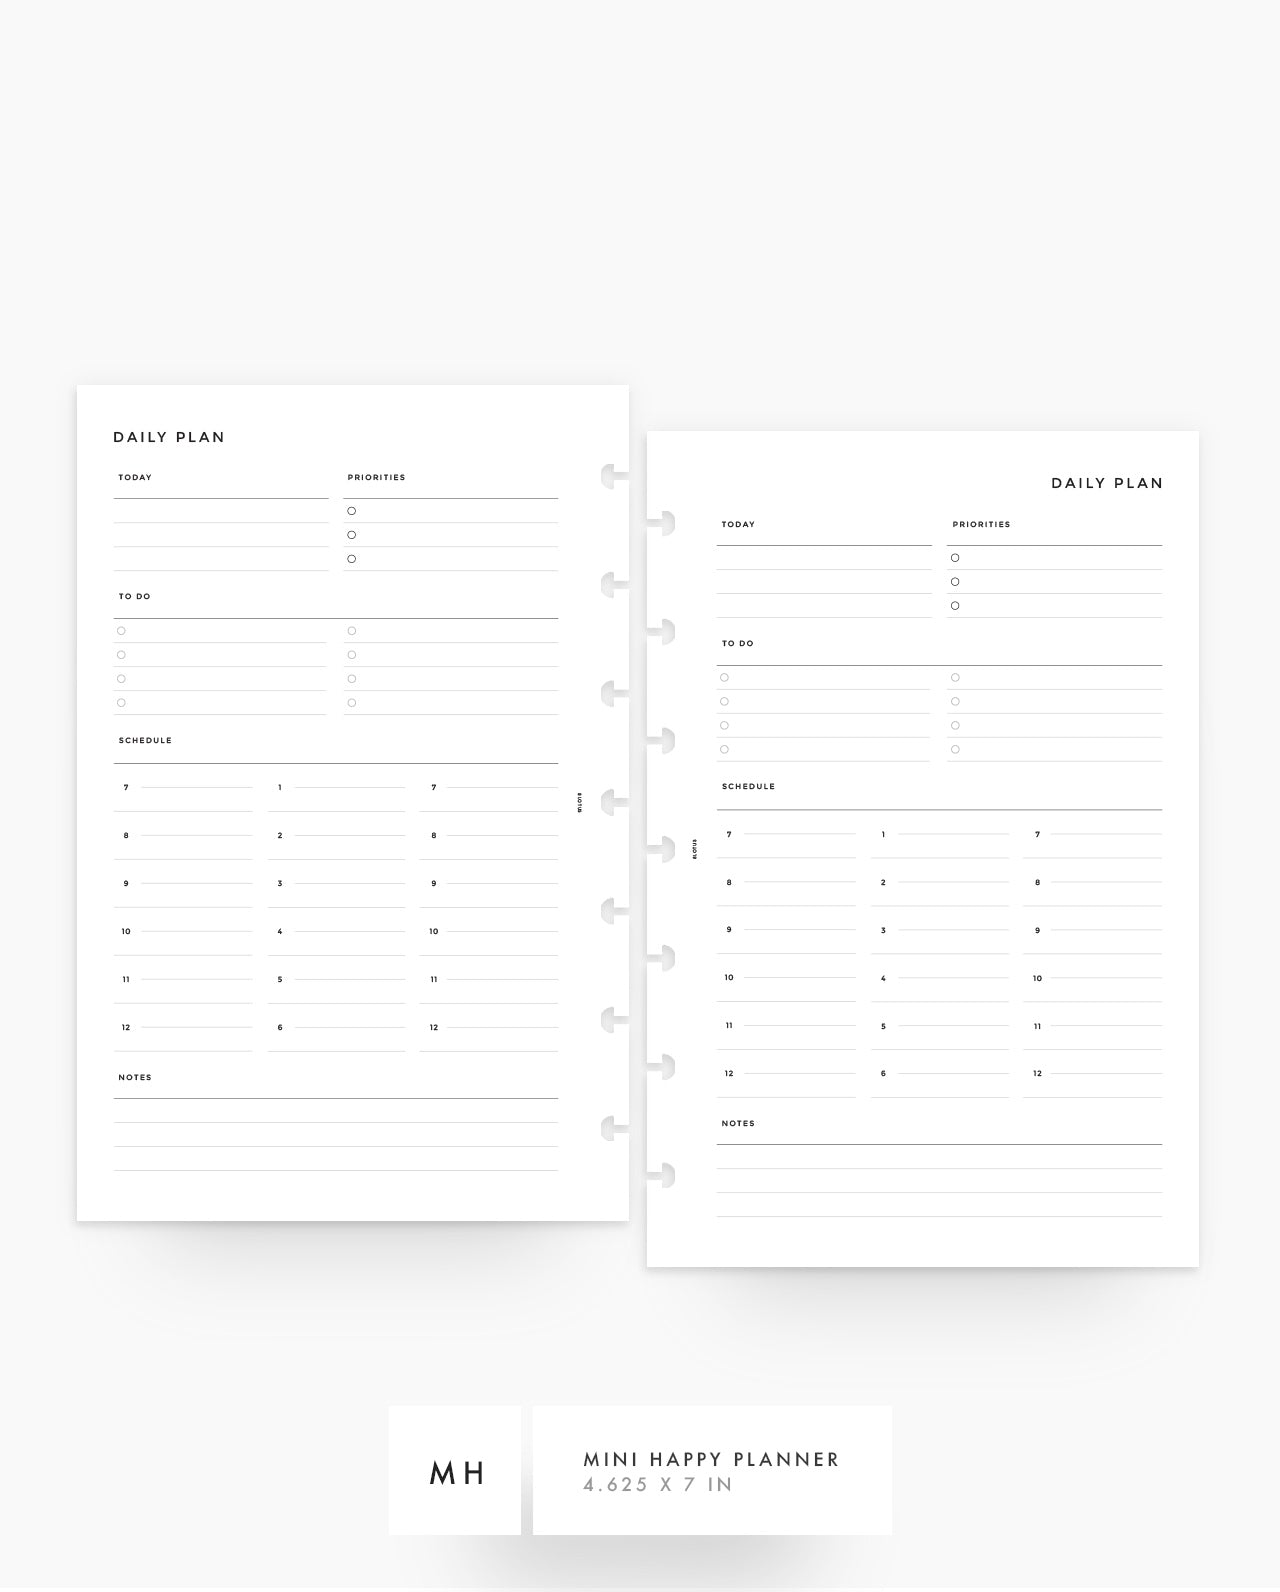 MN056 - DAILY HALF HOUR PLANNER - 18 Hours  - PDF